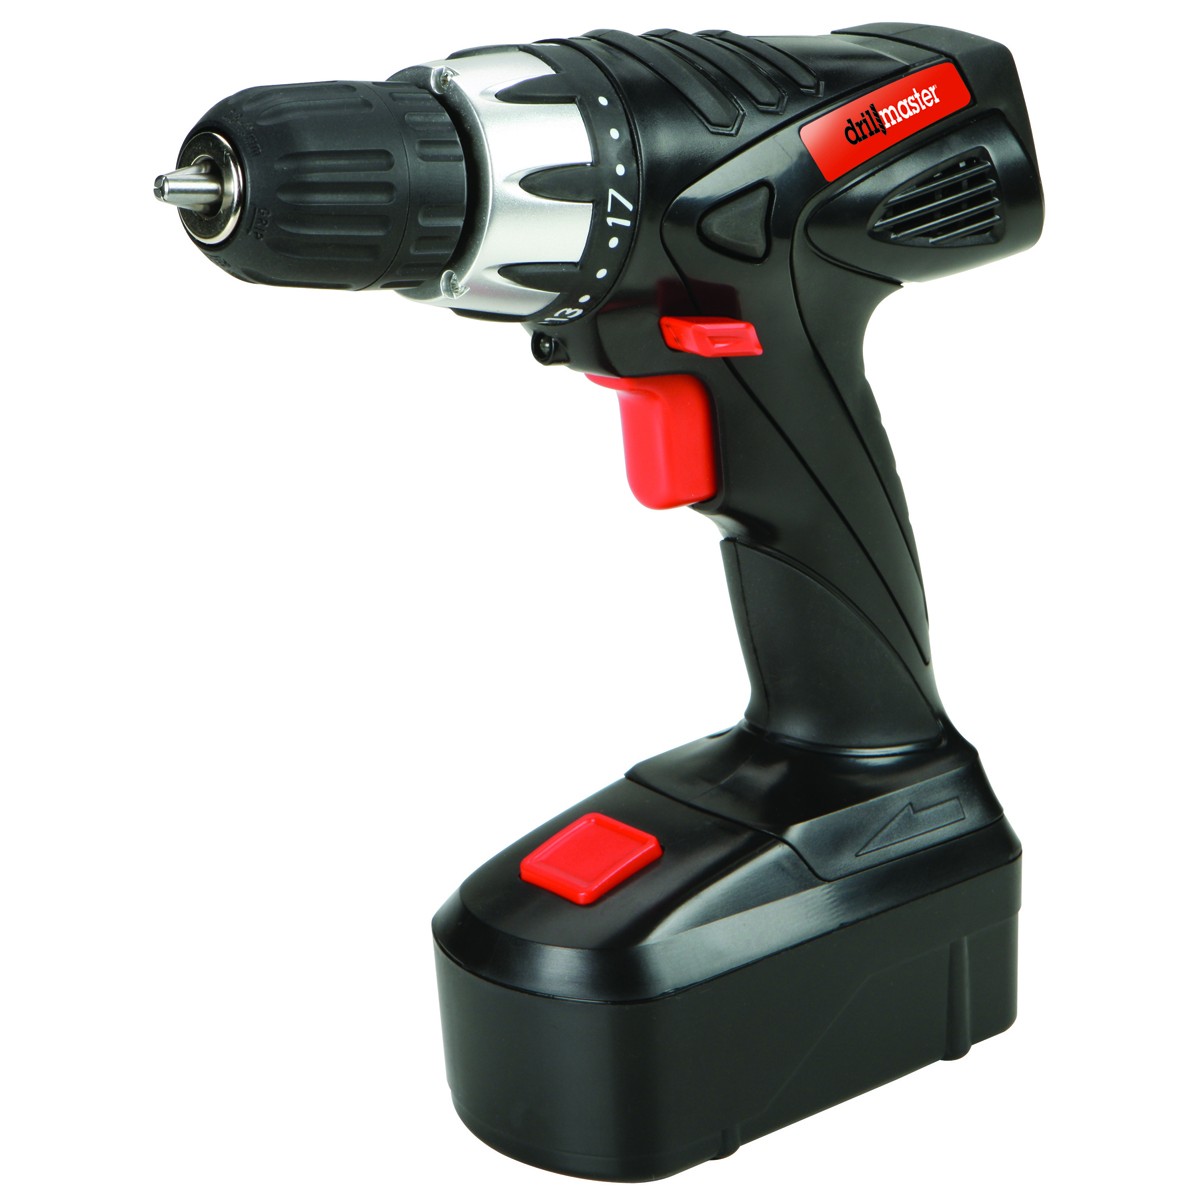 Harbor Freight Drill Master 18V Drill Video Review - Cordless $20 Drill